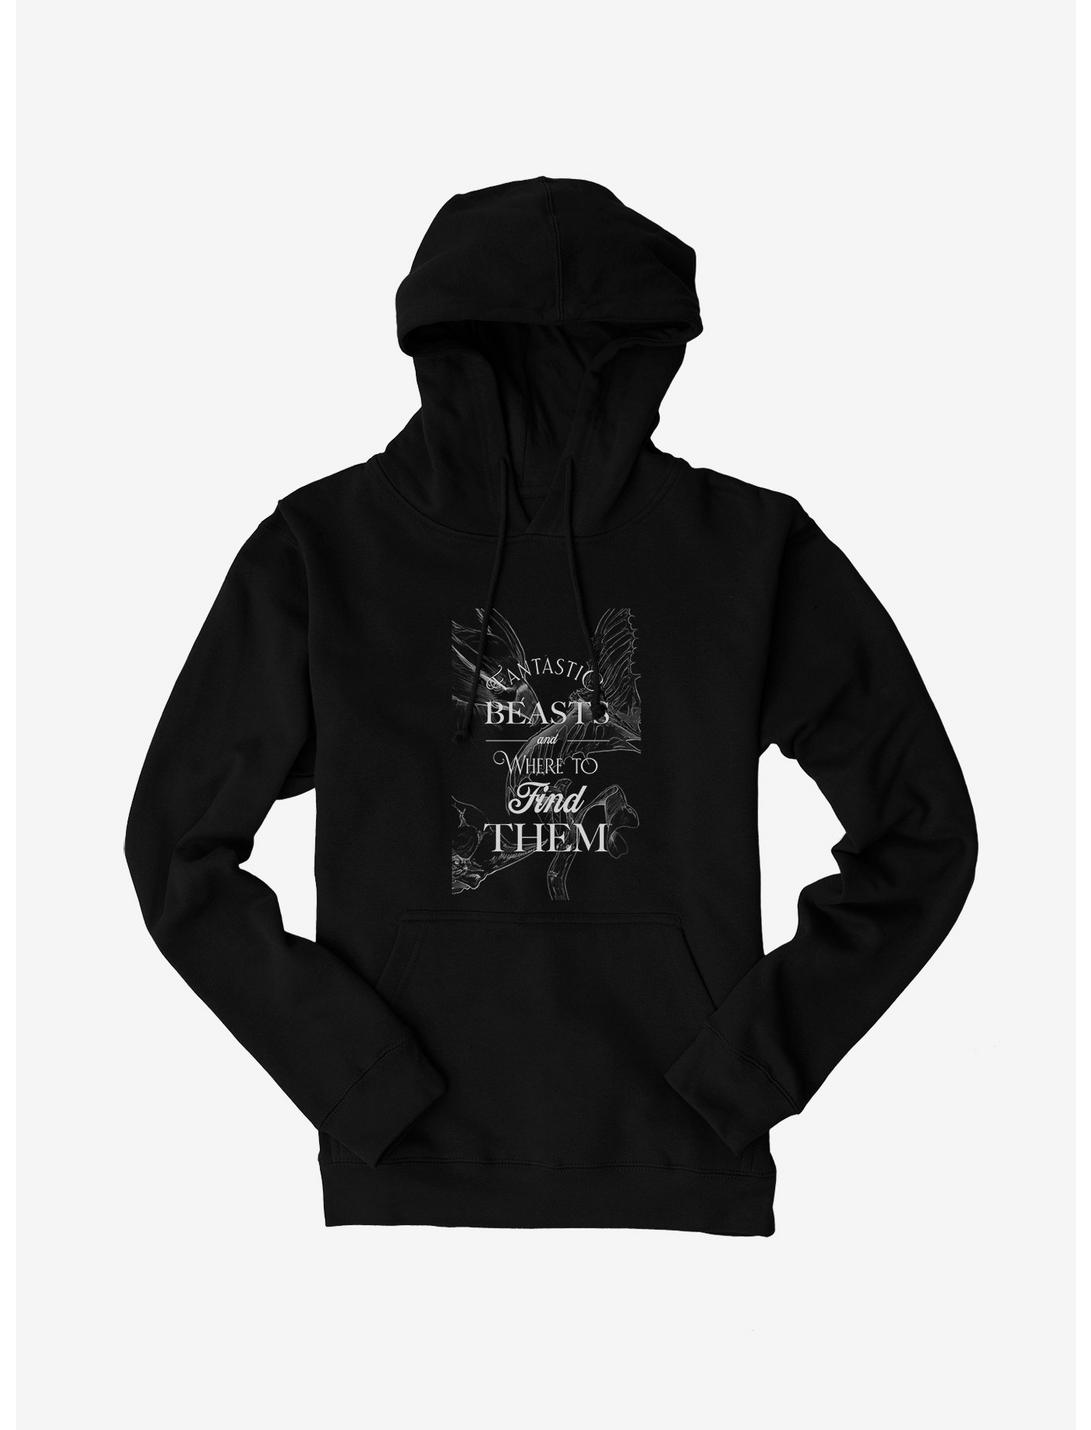 Fantastic Beasts And Where To Find Them Hoodie, BLACK, hi-res